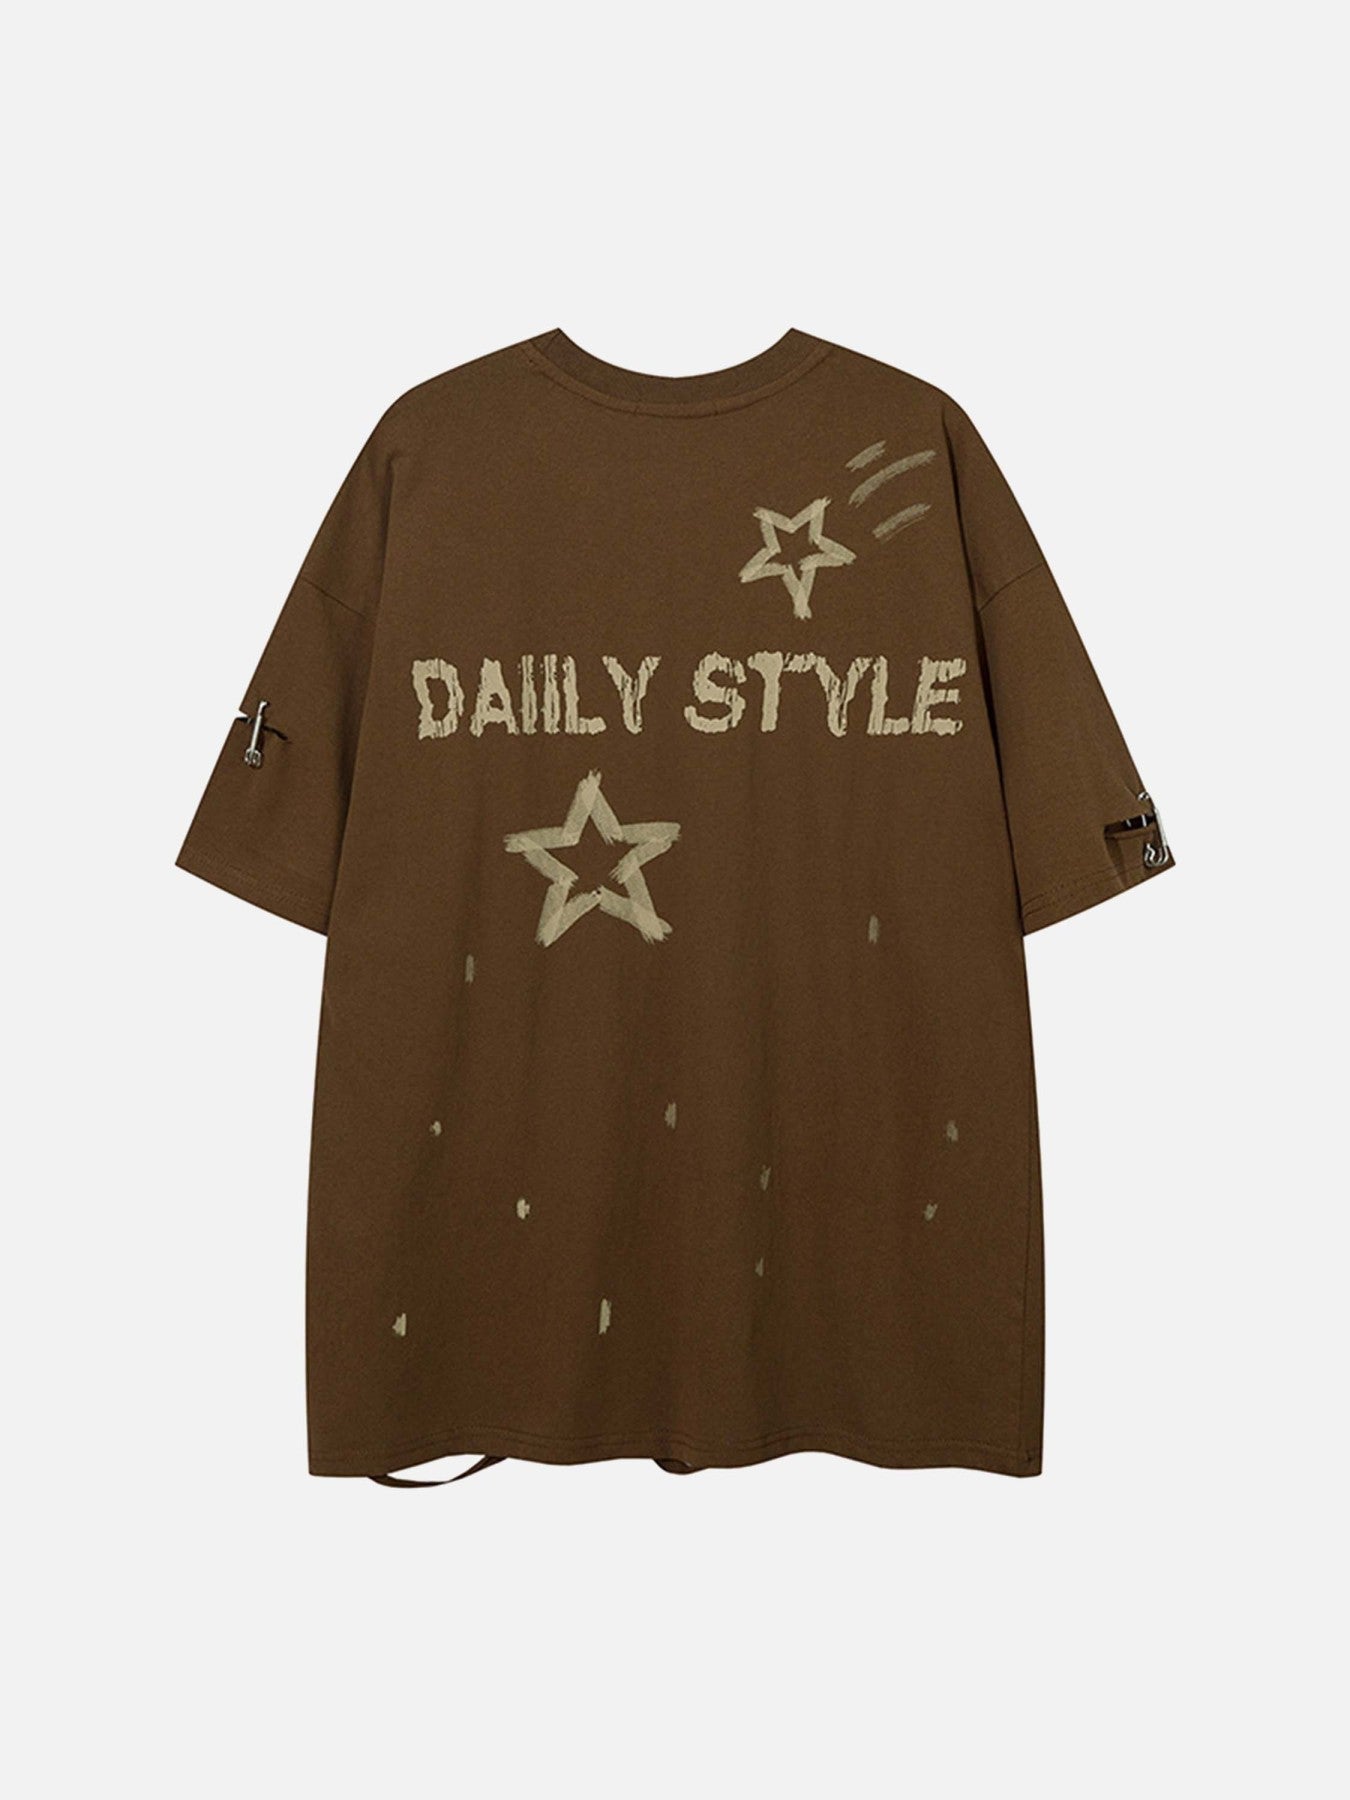 The Supermade High Street Star Loose T-Shirt